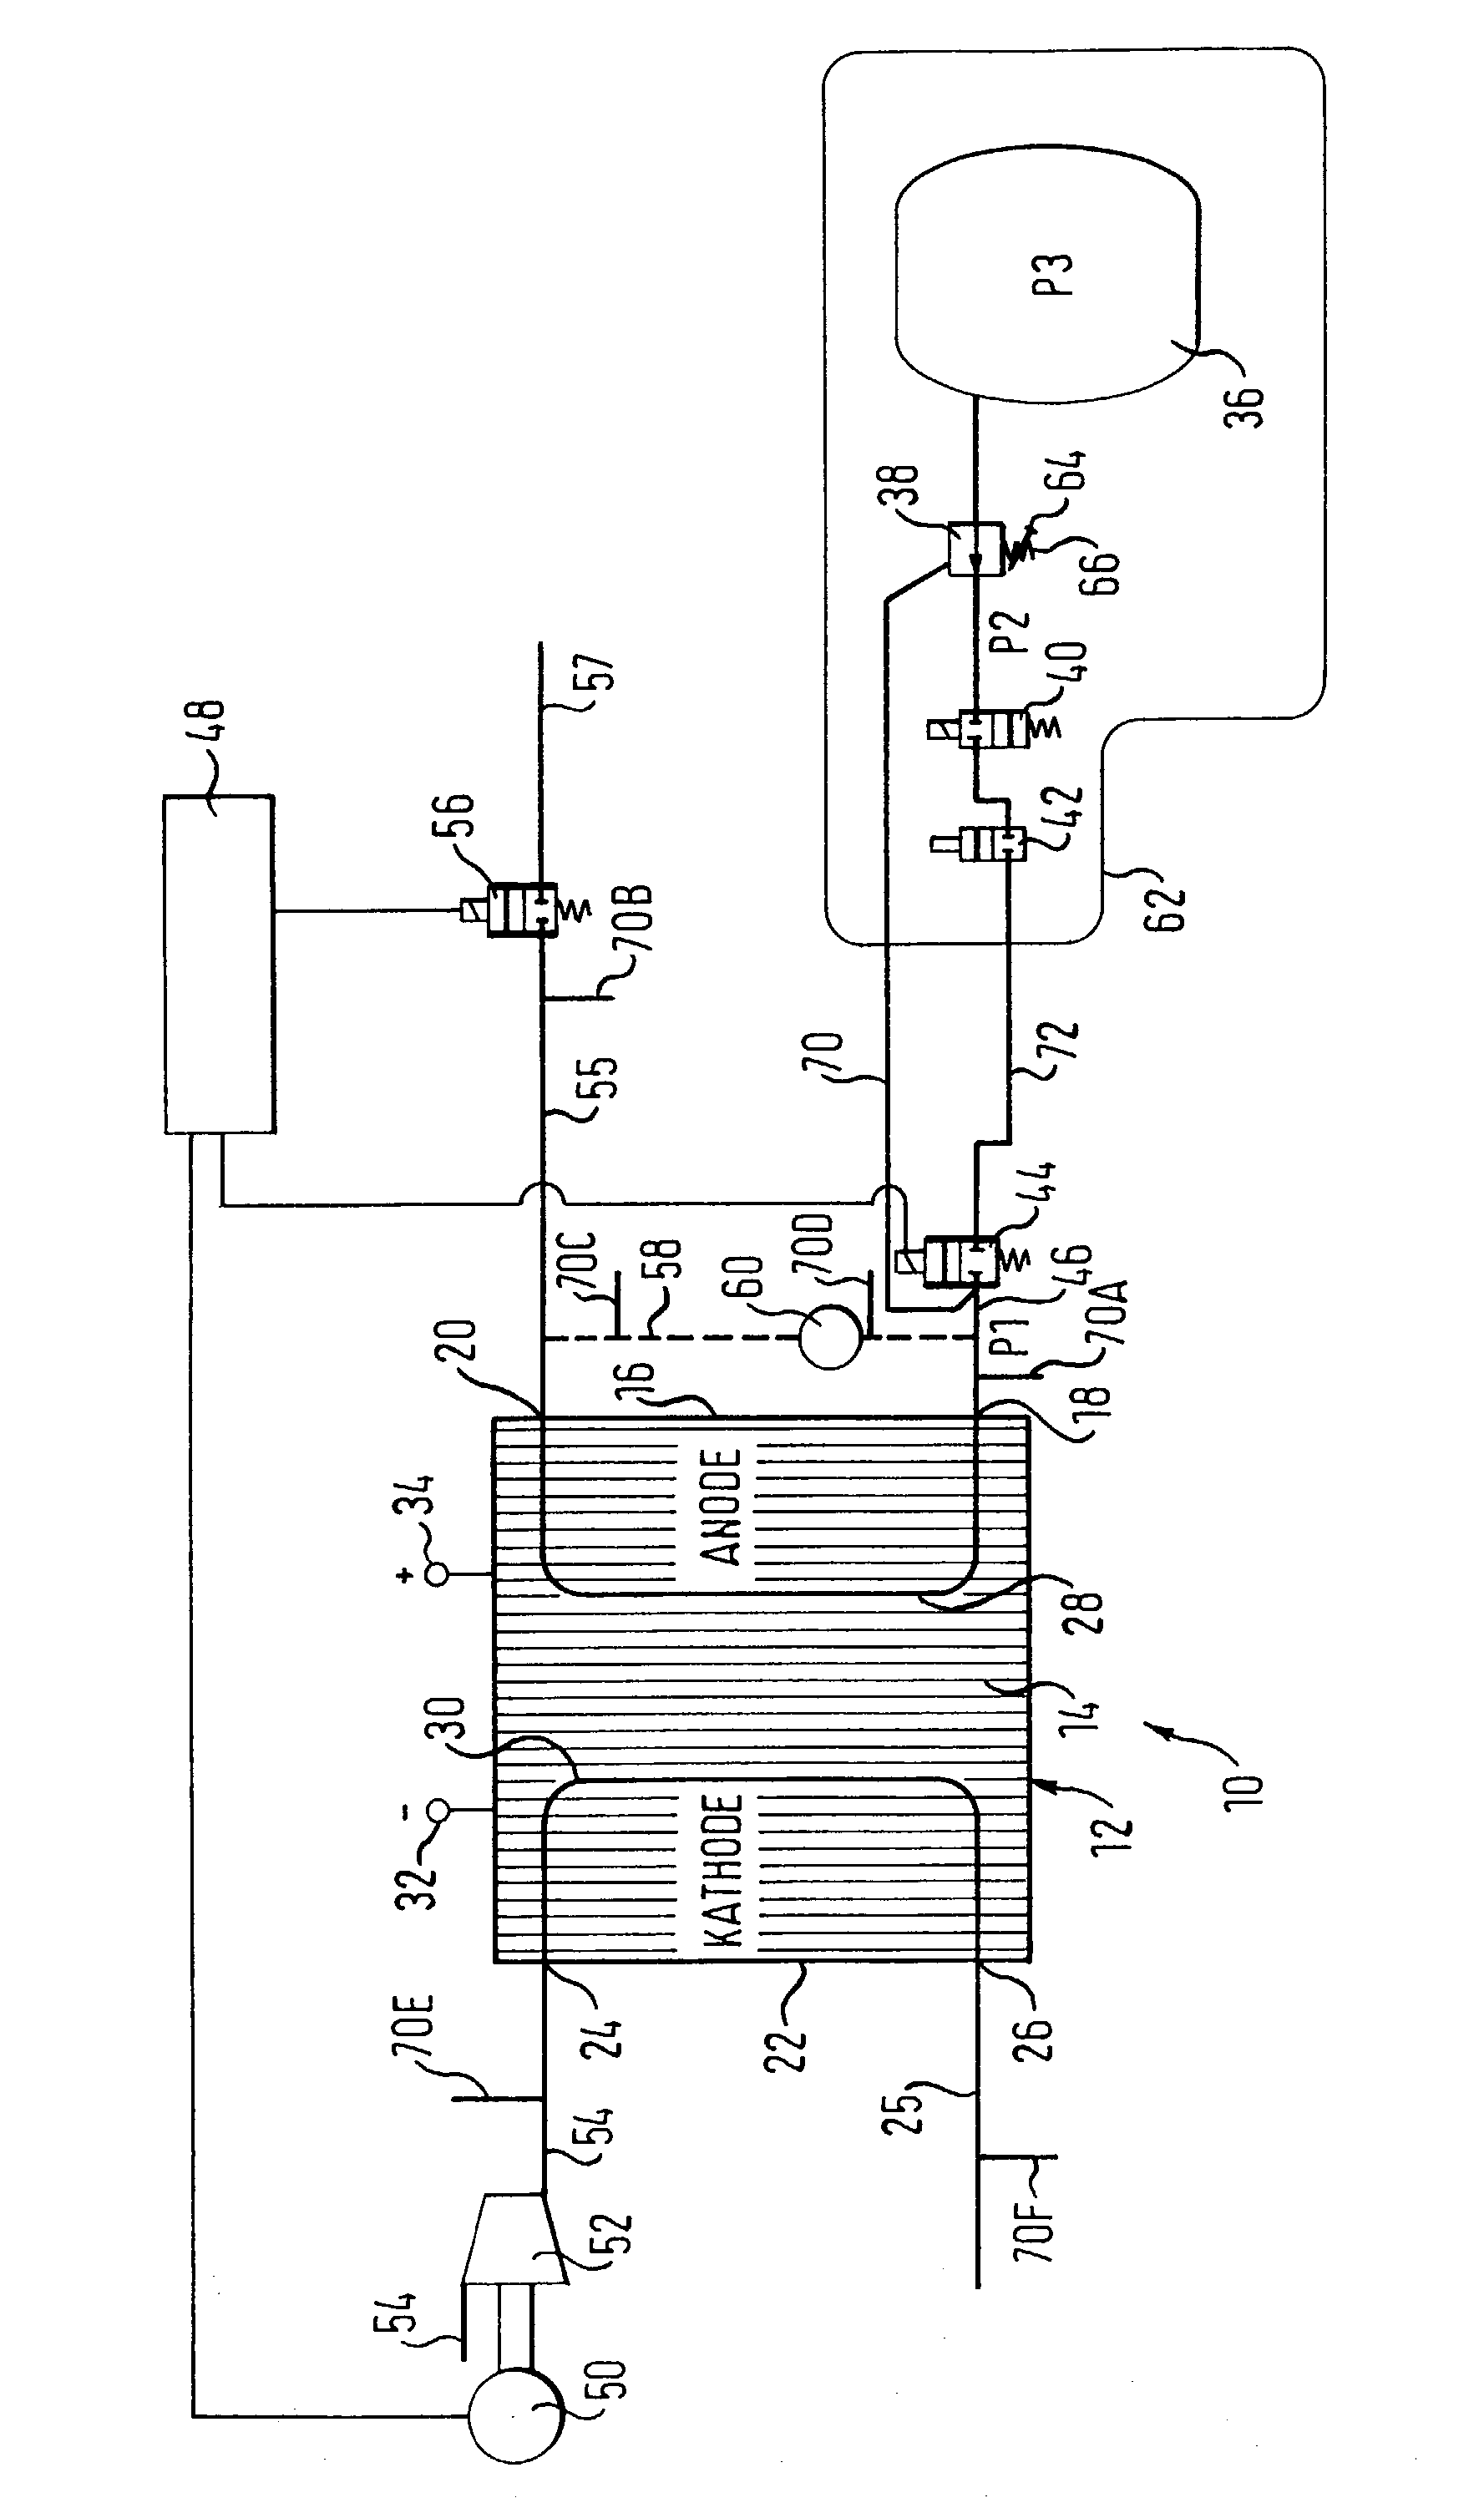 Pressure regulation of a fuel cell hydrogen tank system